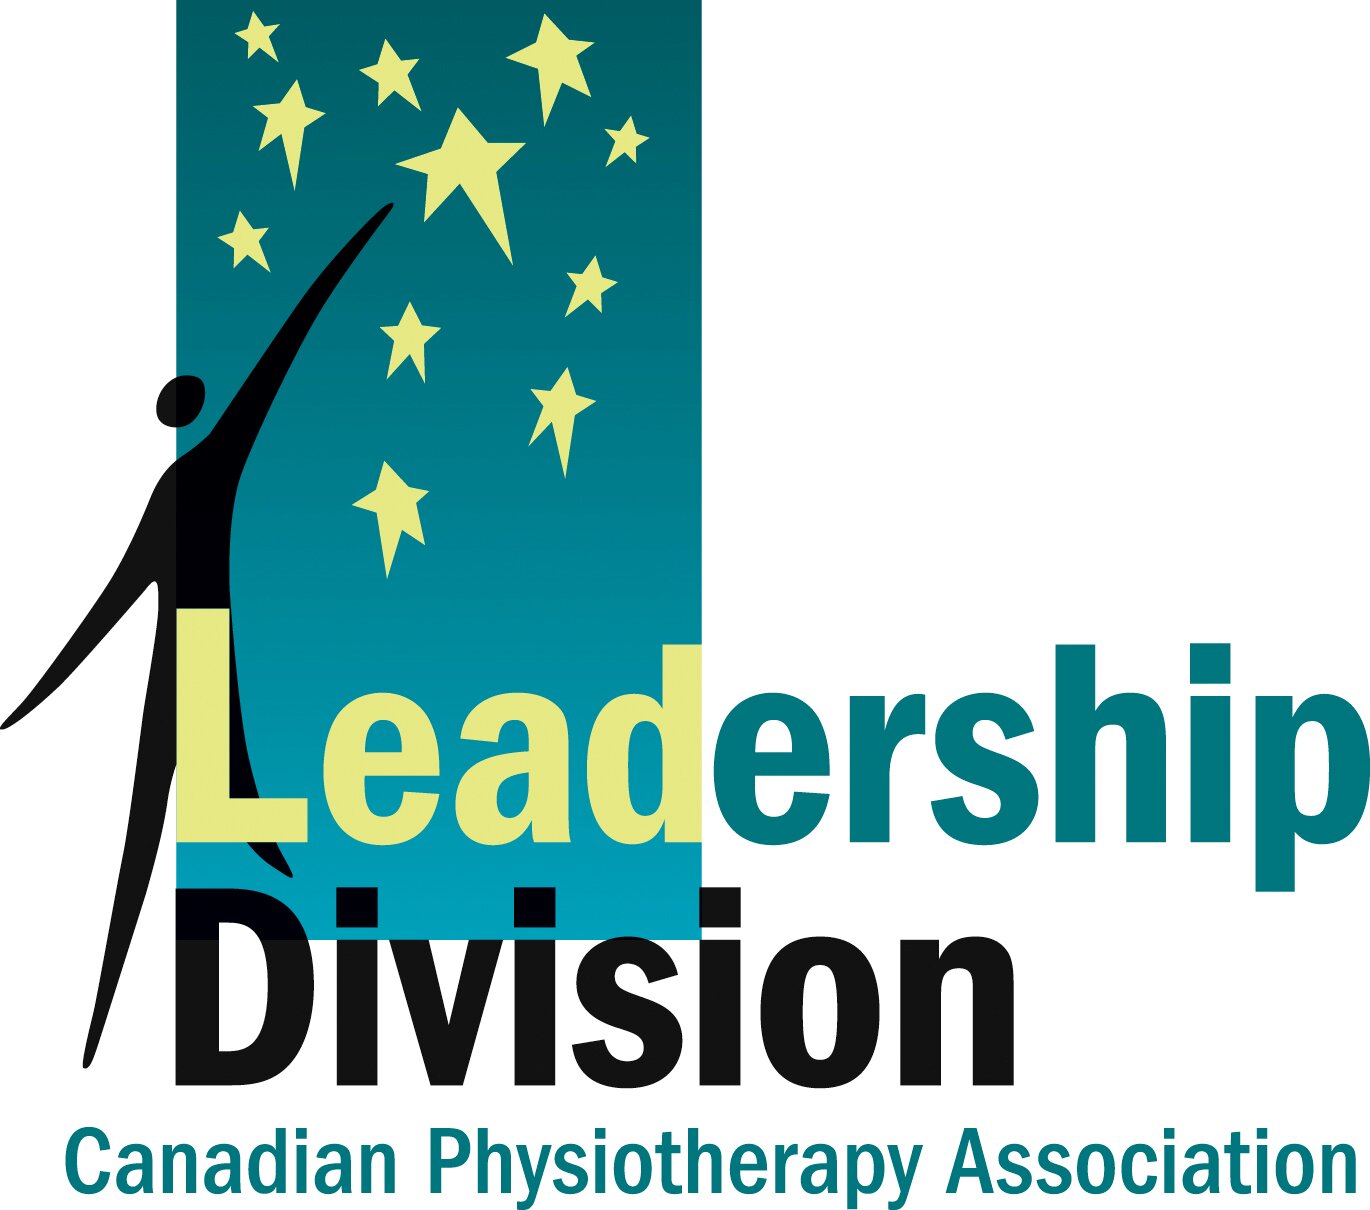 Leadership Division of the Canadian Physiotherapy Association - For physiotherapists involved and interested in leadership